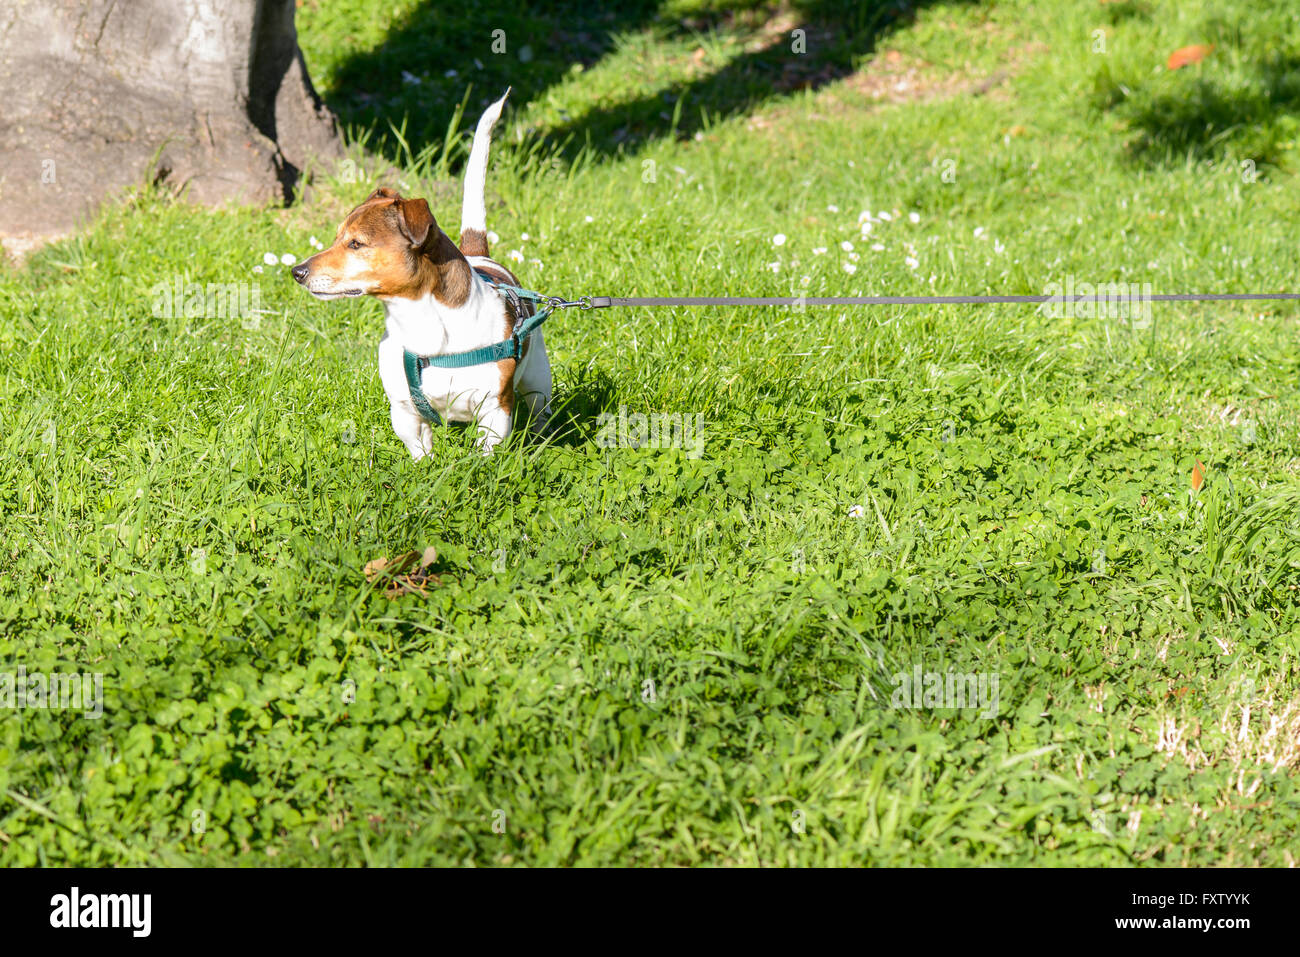 Nice Jack Russel dog in a garden in Rome Stock Photo